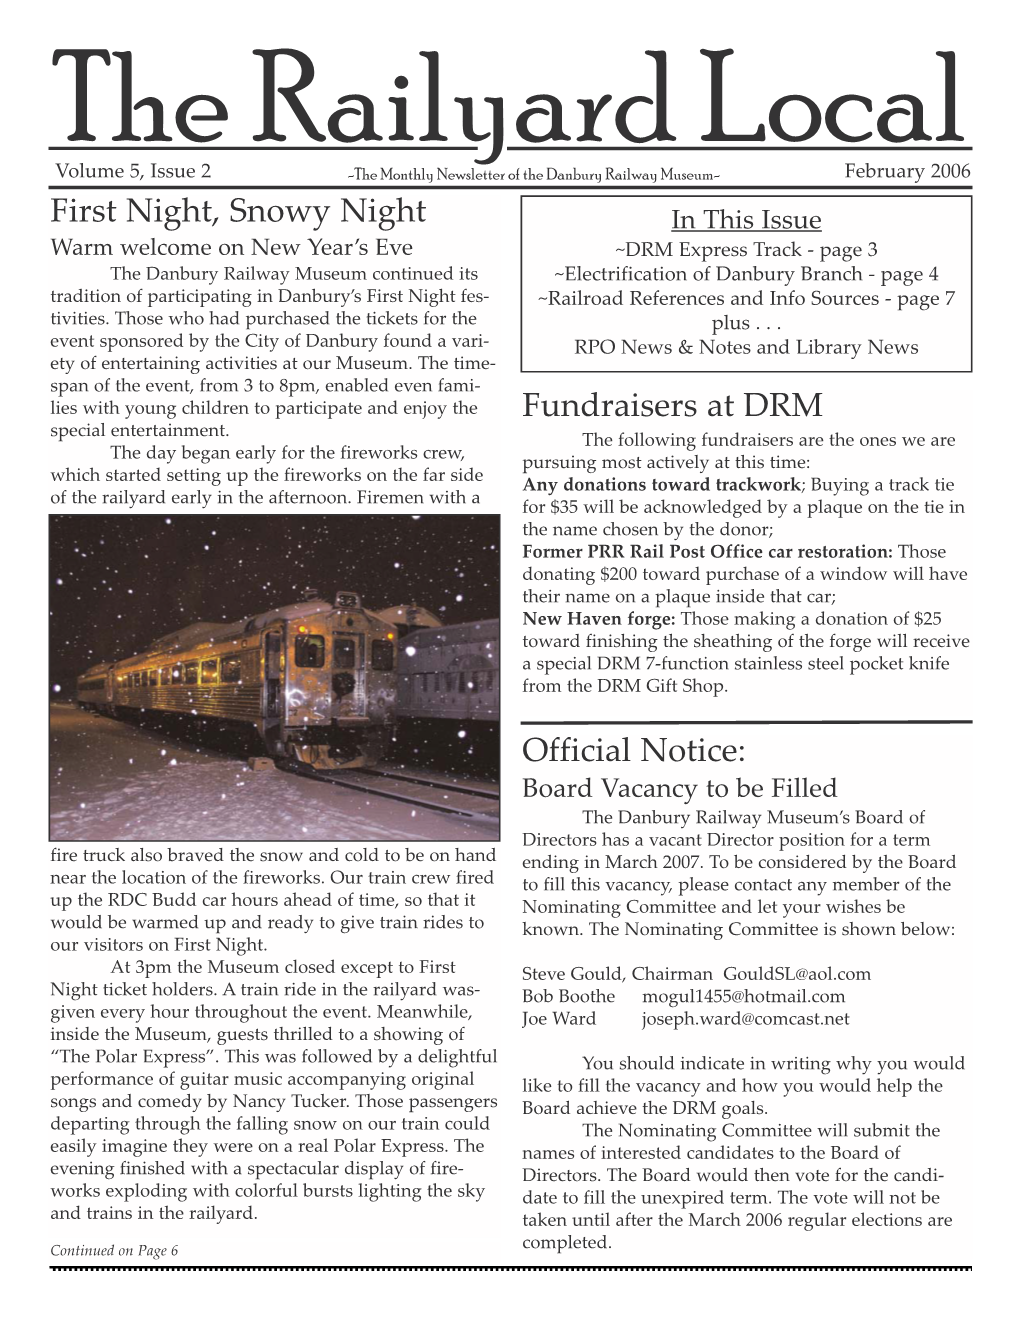 First Night, Snowy Night Fundraisers at DRM Official Notice